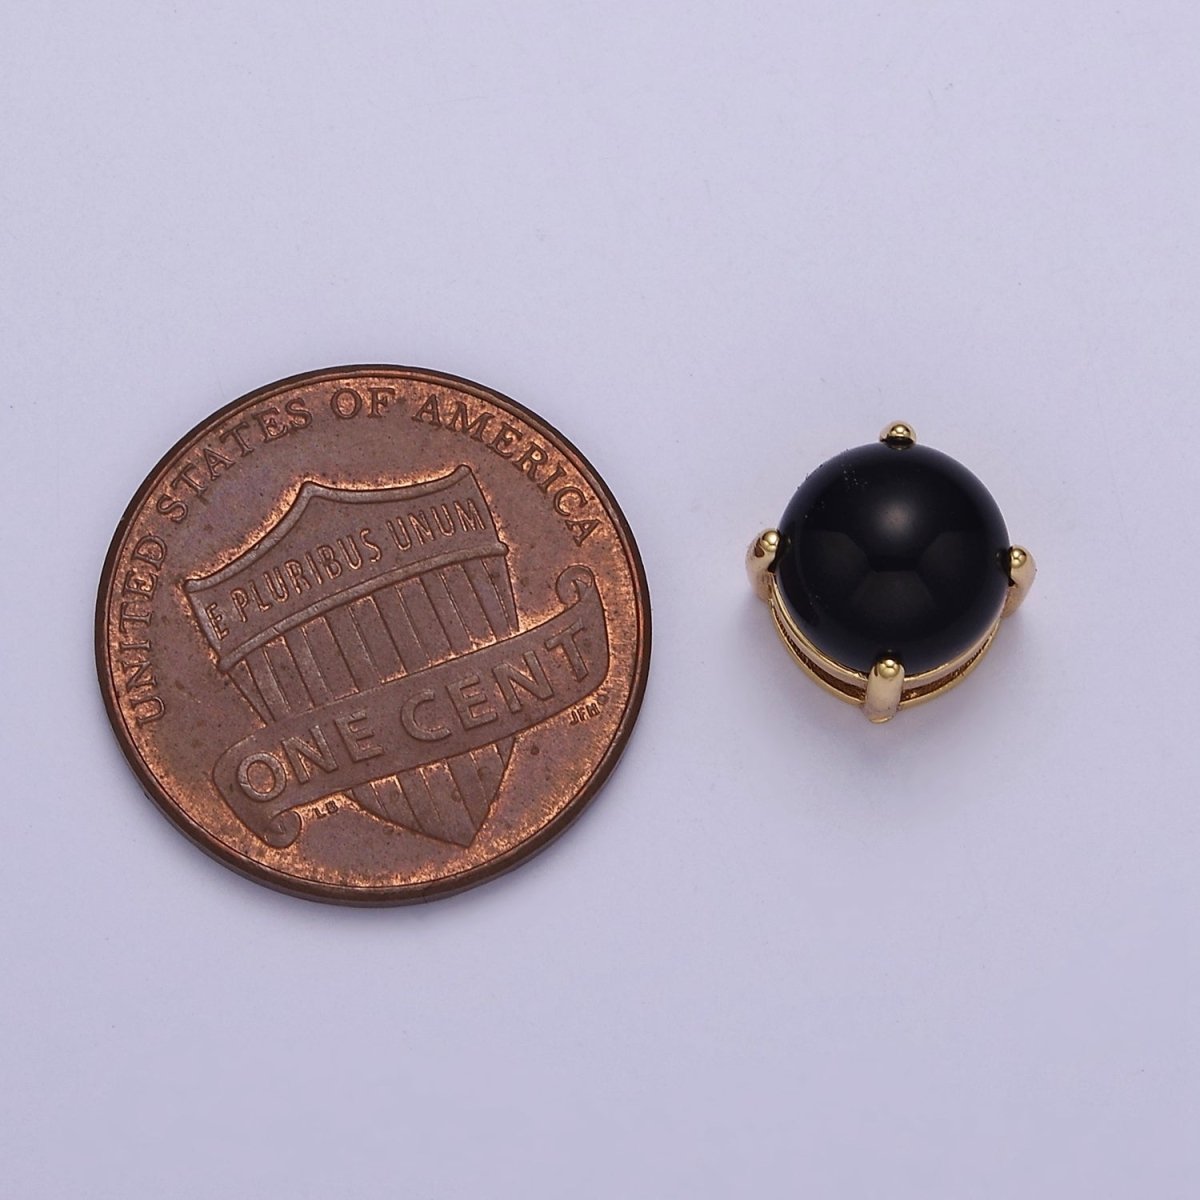 Black Round Ball Bead For Bracelet Necklace Spacer B-227 - DLUXCA